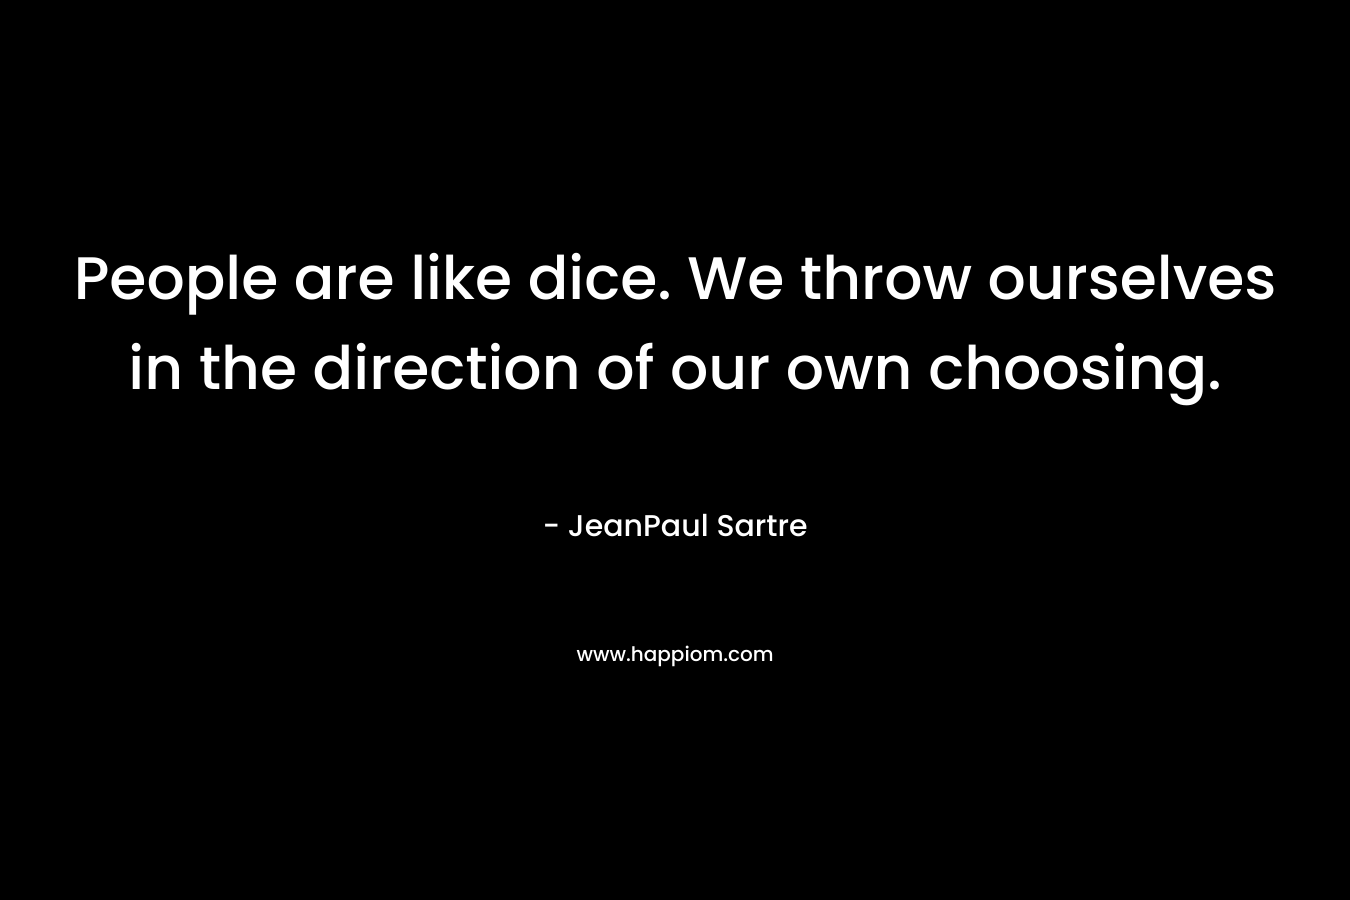 People are like dice. We throw ourselves in the direction of our own choosing. – JeanPaul Sartre